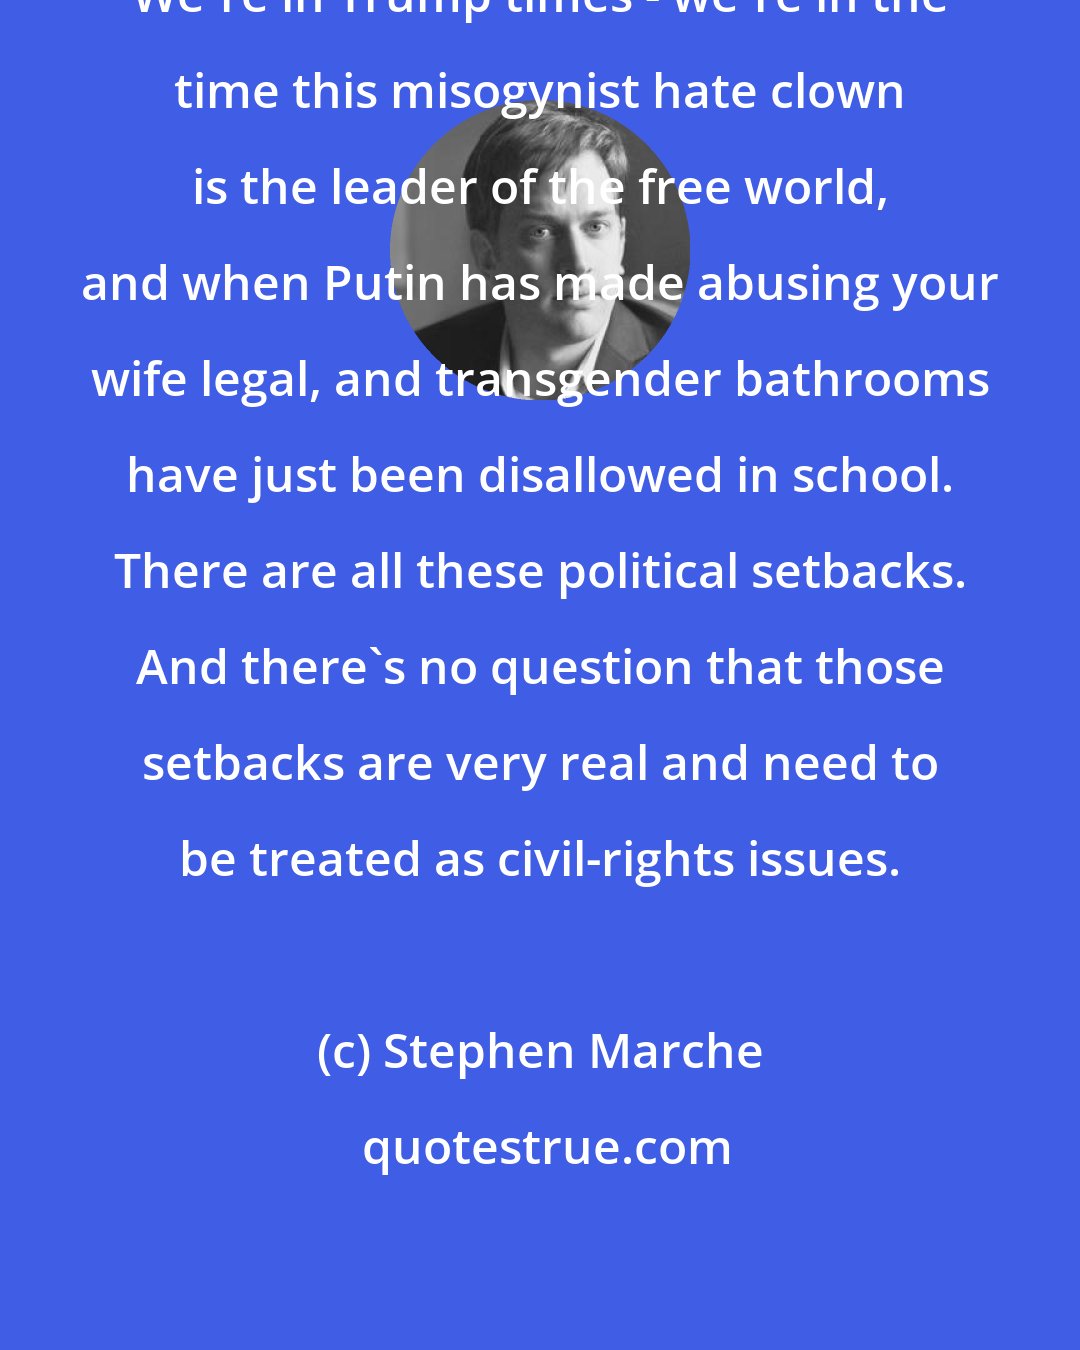 Stephen Marche: We're in Trump times - we're in the time this misogynist hate clown is the leader of the free world, and when Putin has made abusing your wife legal, and transgender bathrooms have just been disallowed in school. There are all these political setbacks. And there's no question that those setbacks are very real and need to be treated as civil-rights issues.